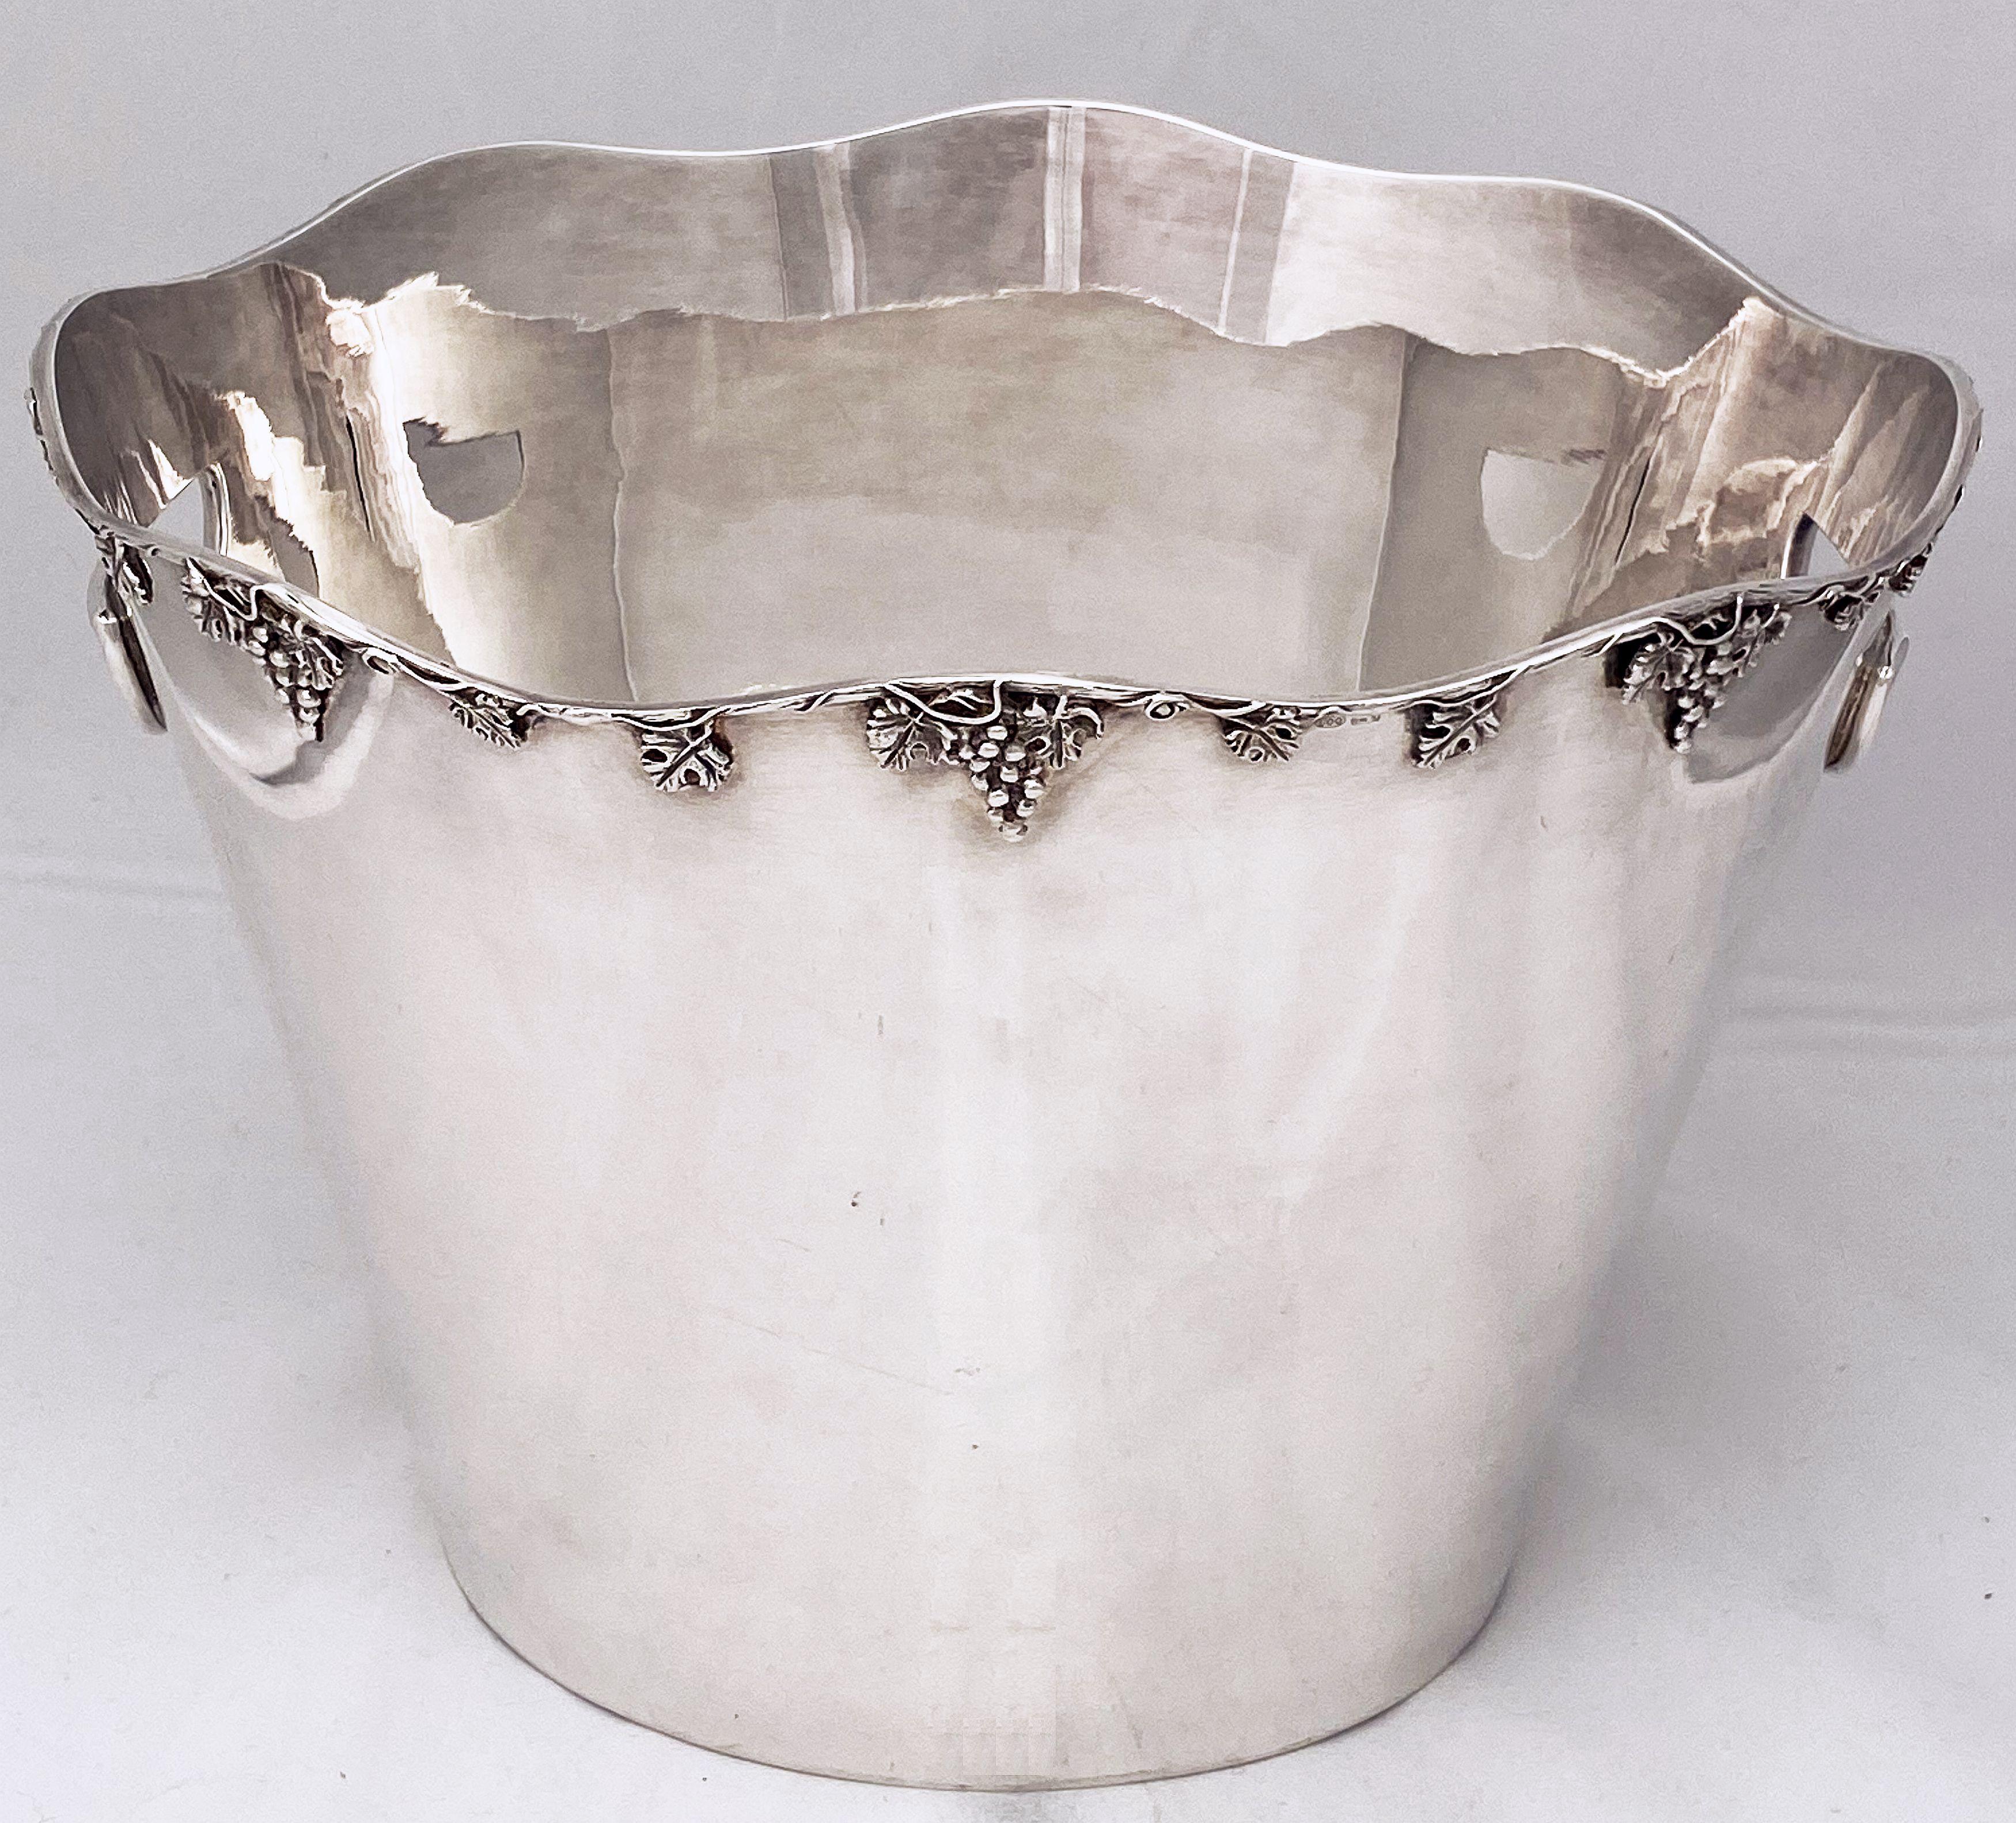 A fine French champagne bucket or wine cooler featuring a gracefully undulating top edge with relief of grapes and grape leaves, and inset opposing handles.

Impressed hallmark for .800 silver.